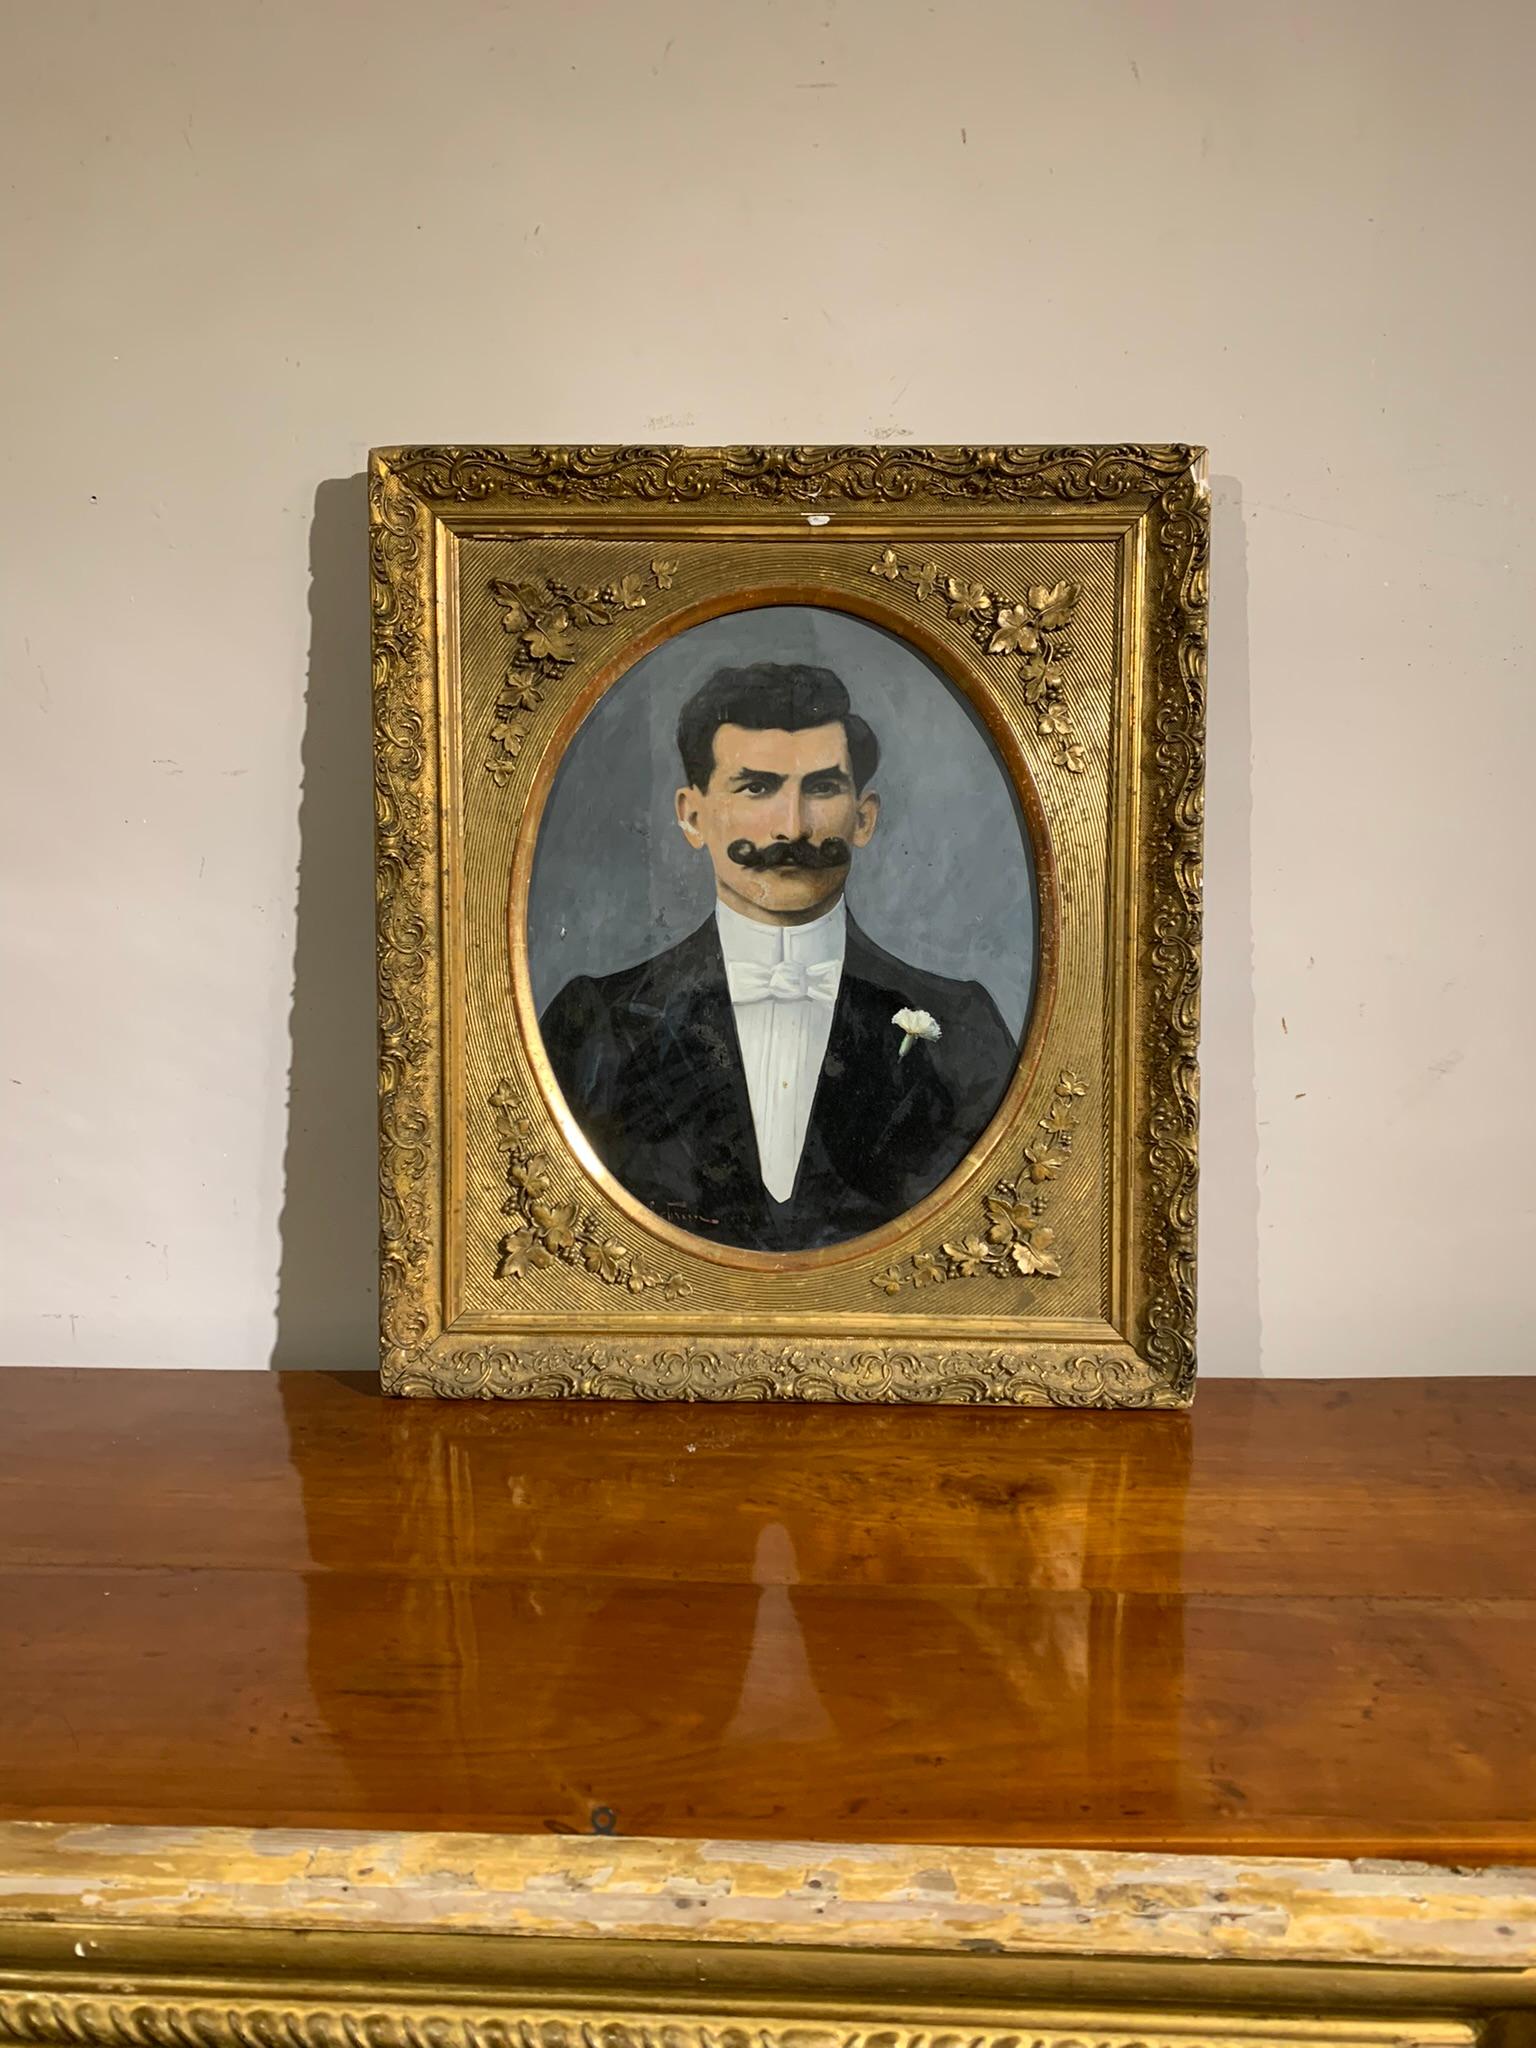 Portrait of a man with a twisted moustache, in the typical dark suit of the Art Nouveau era of the end of the 19th century. Gilt tablet frame, with floral decorations.
Tempera technique on cardboard, unidentifiable signature but certainly French